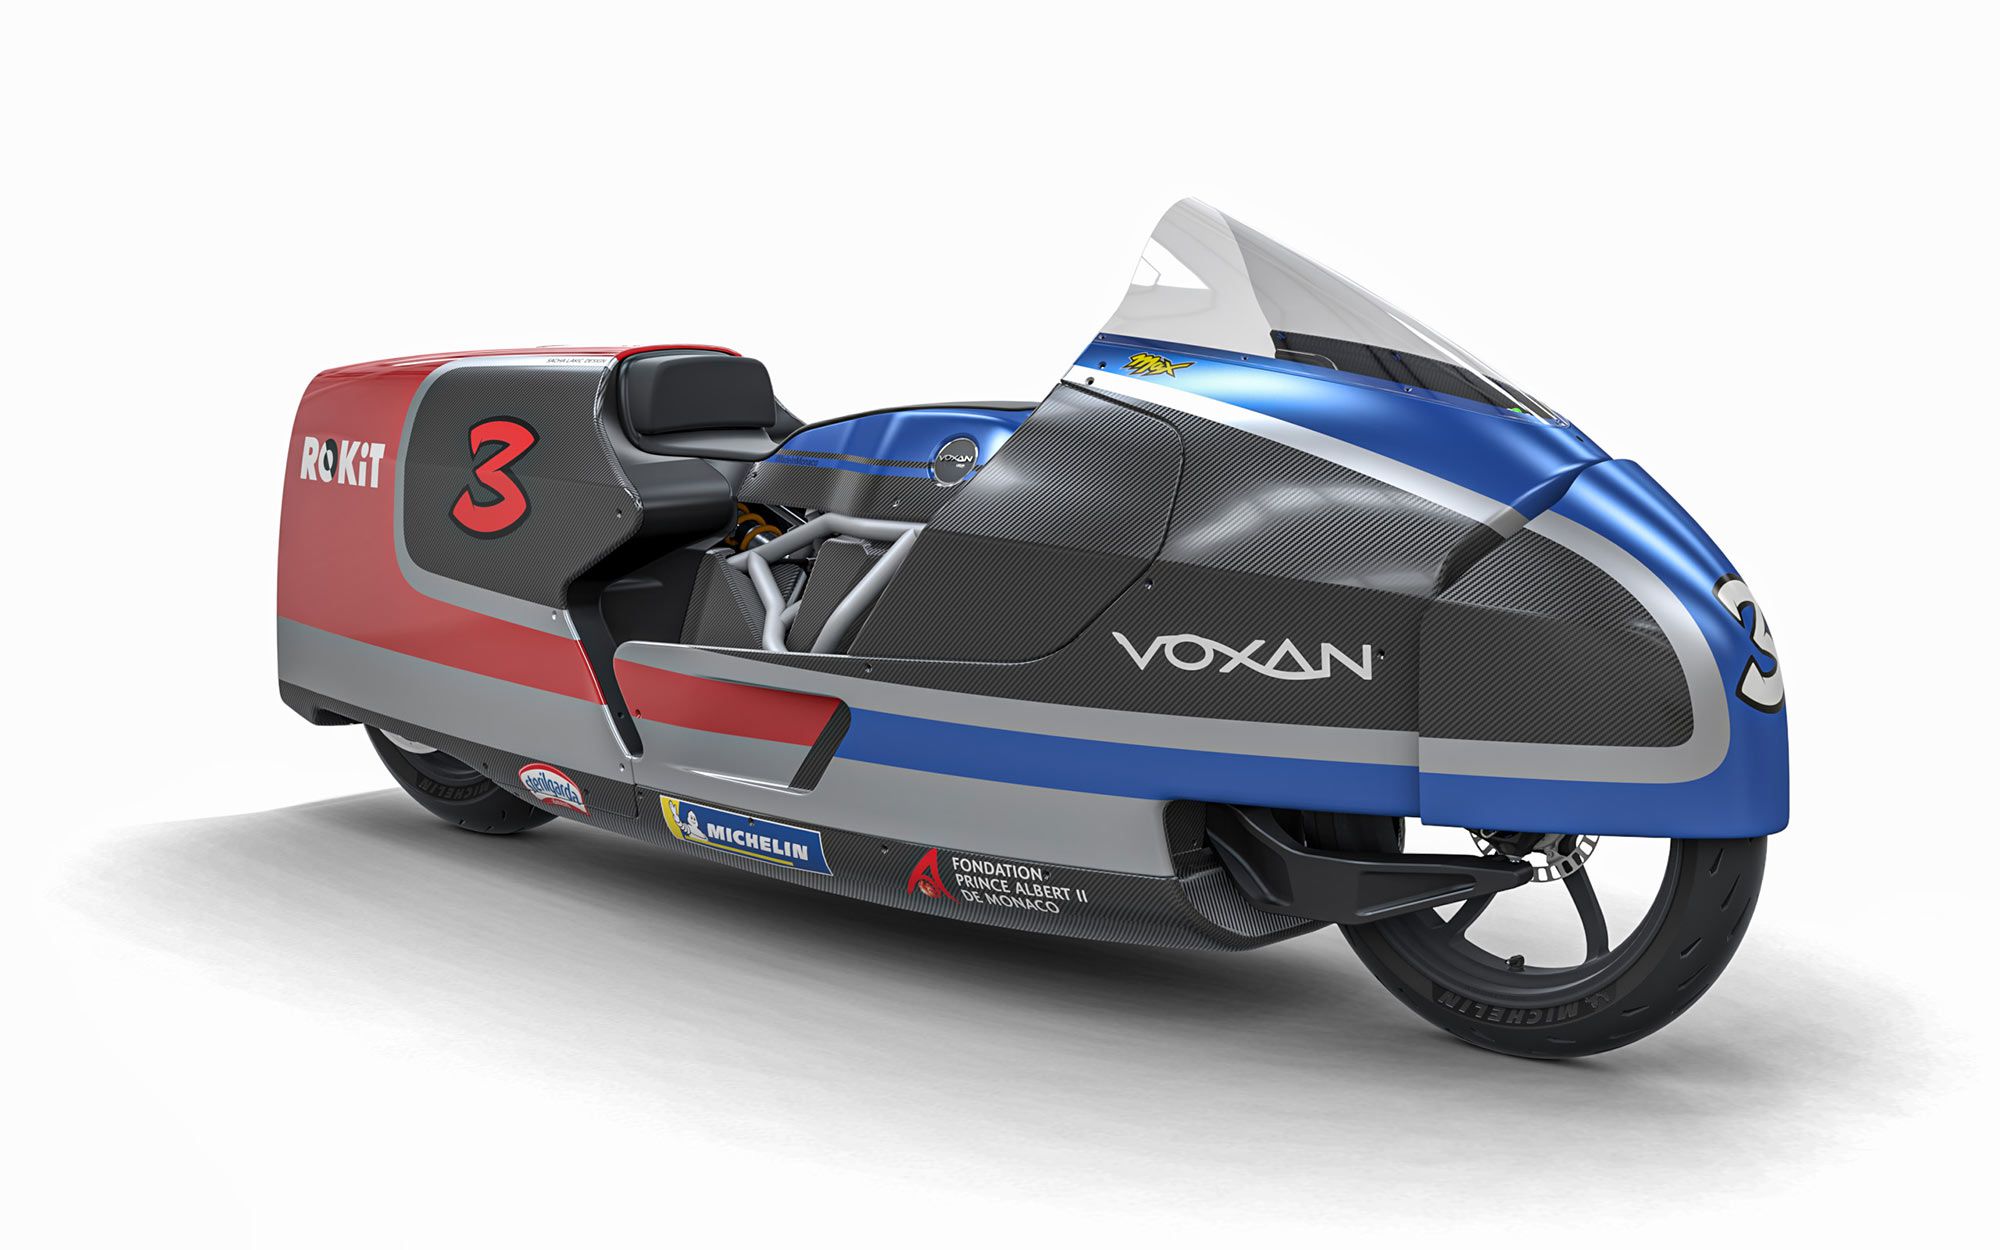 Shown in partially faired form, the Voxan Wattman set an ebike world record of 254 mph.